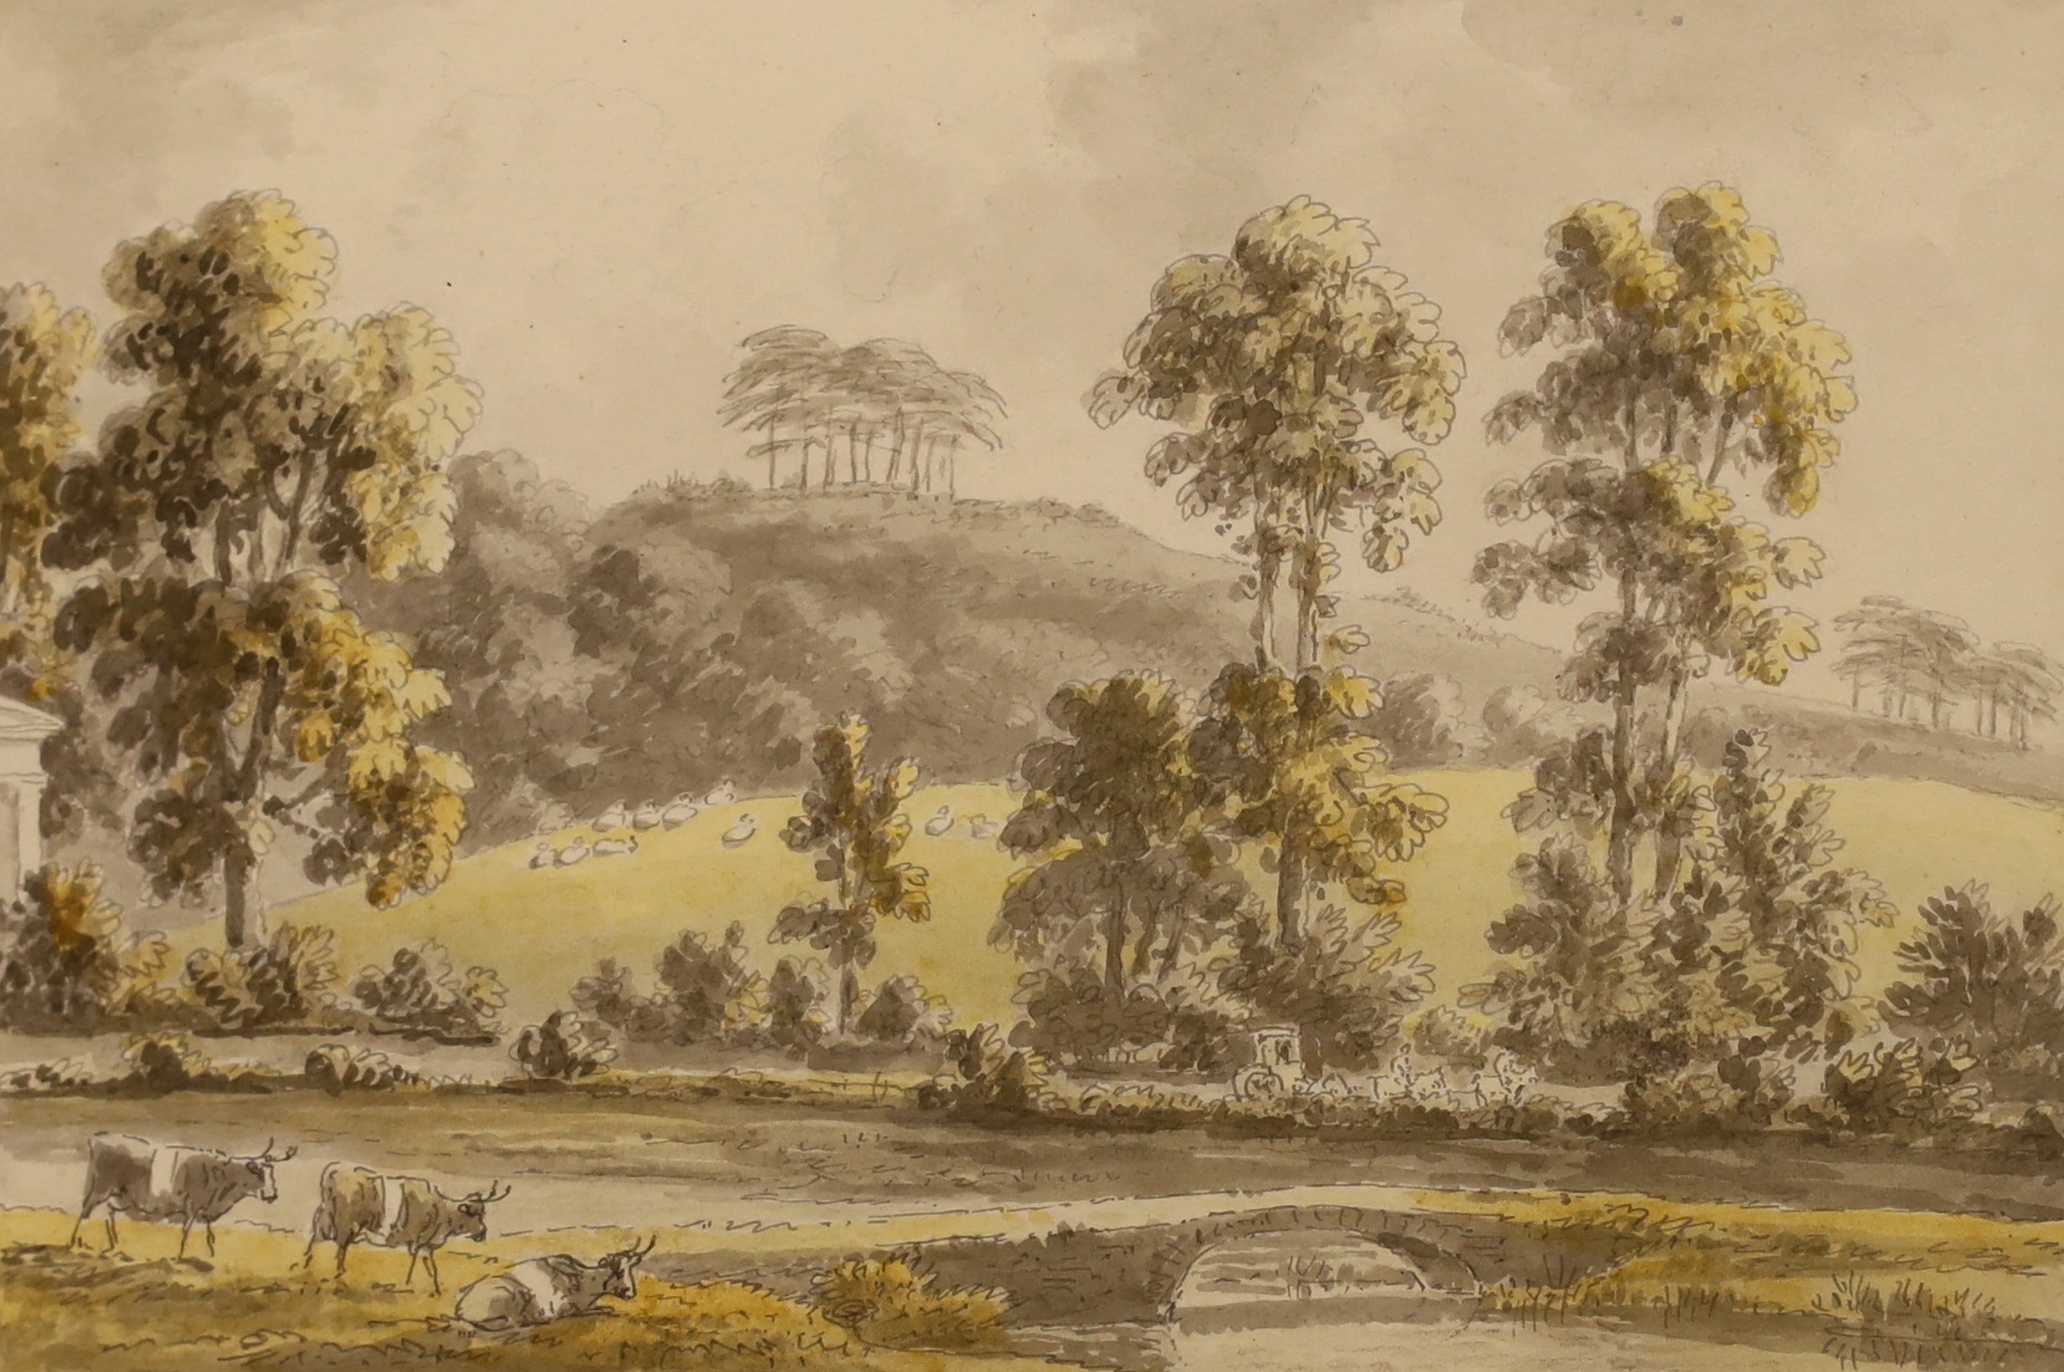 Late 18th/early 19th century ink and watercolour on paper, river landscape with cattle, mounted, unframed, 21cm x 14cm